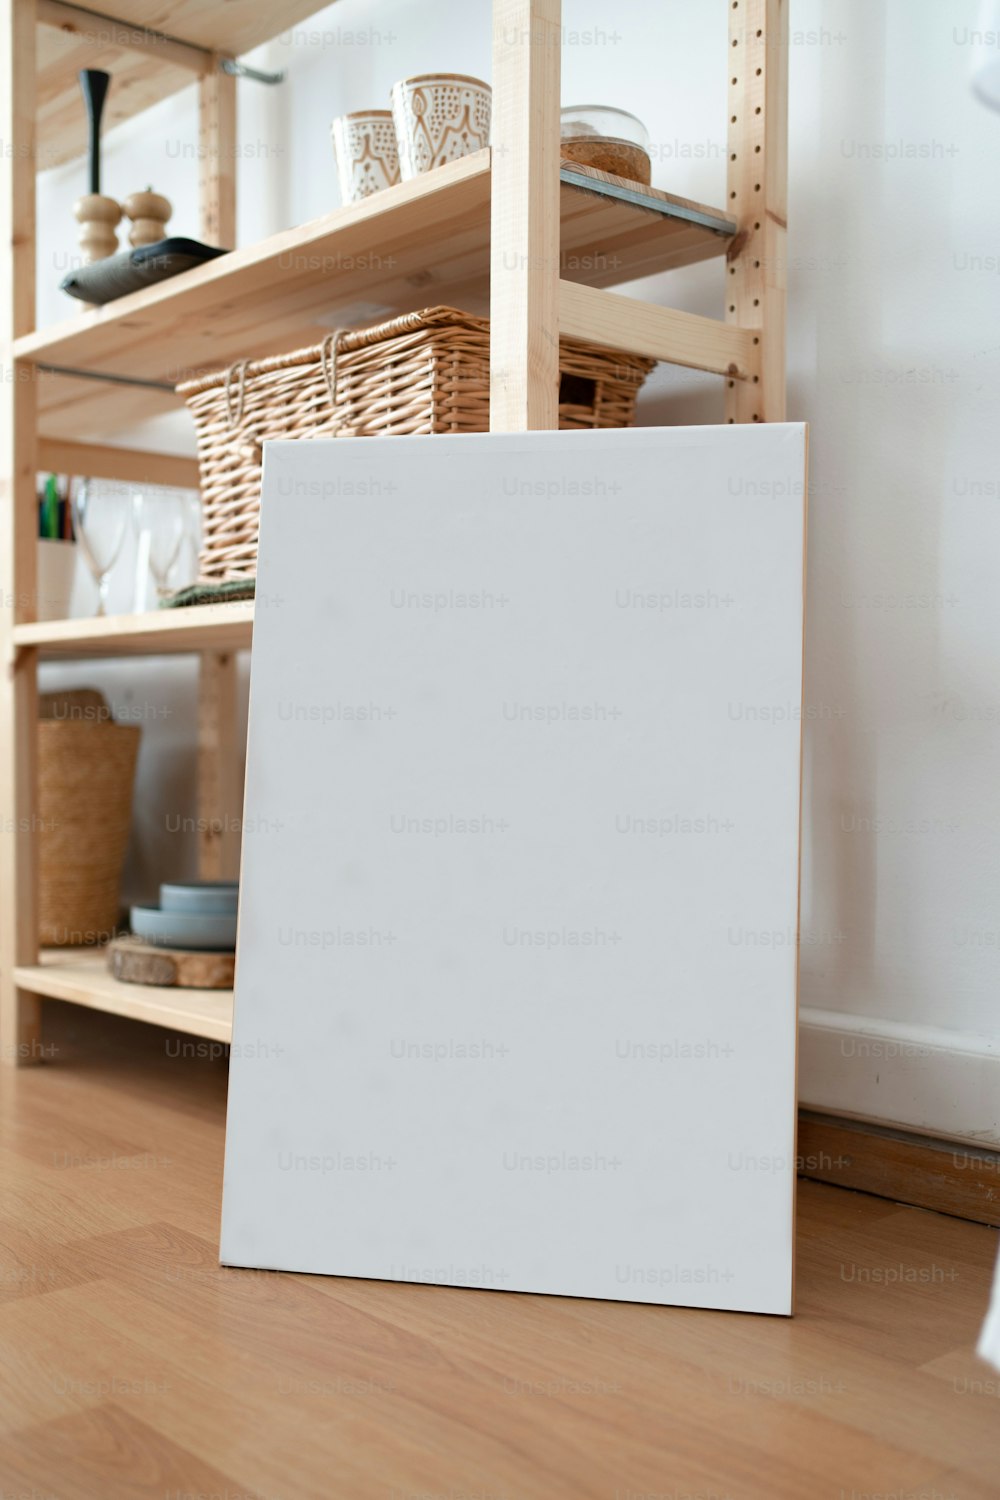 a white board on a wooden floor in a room